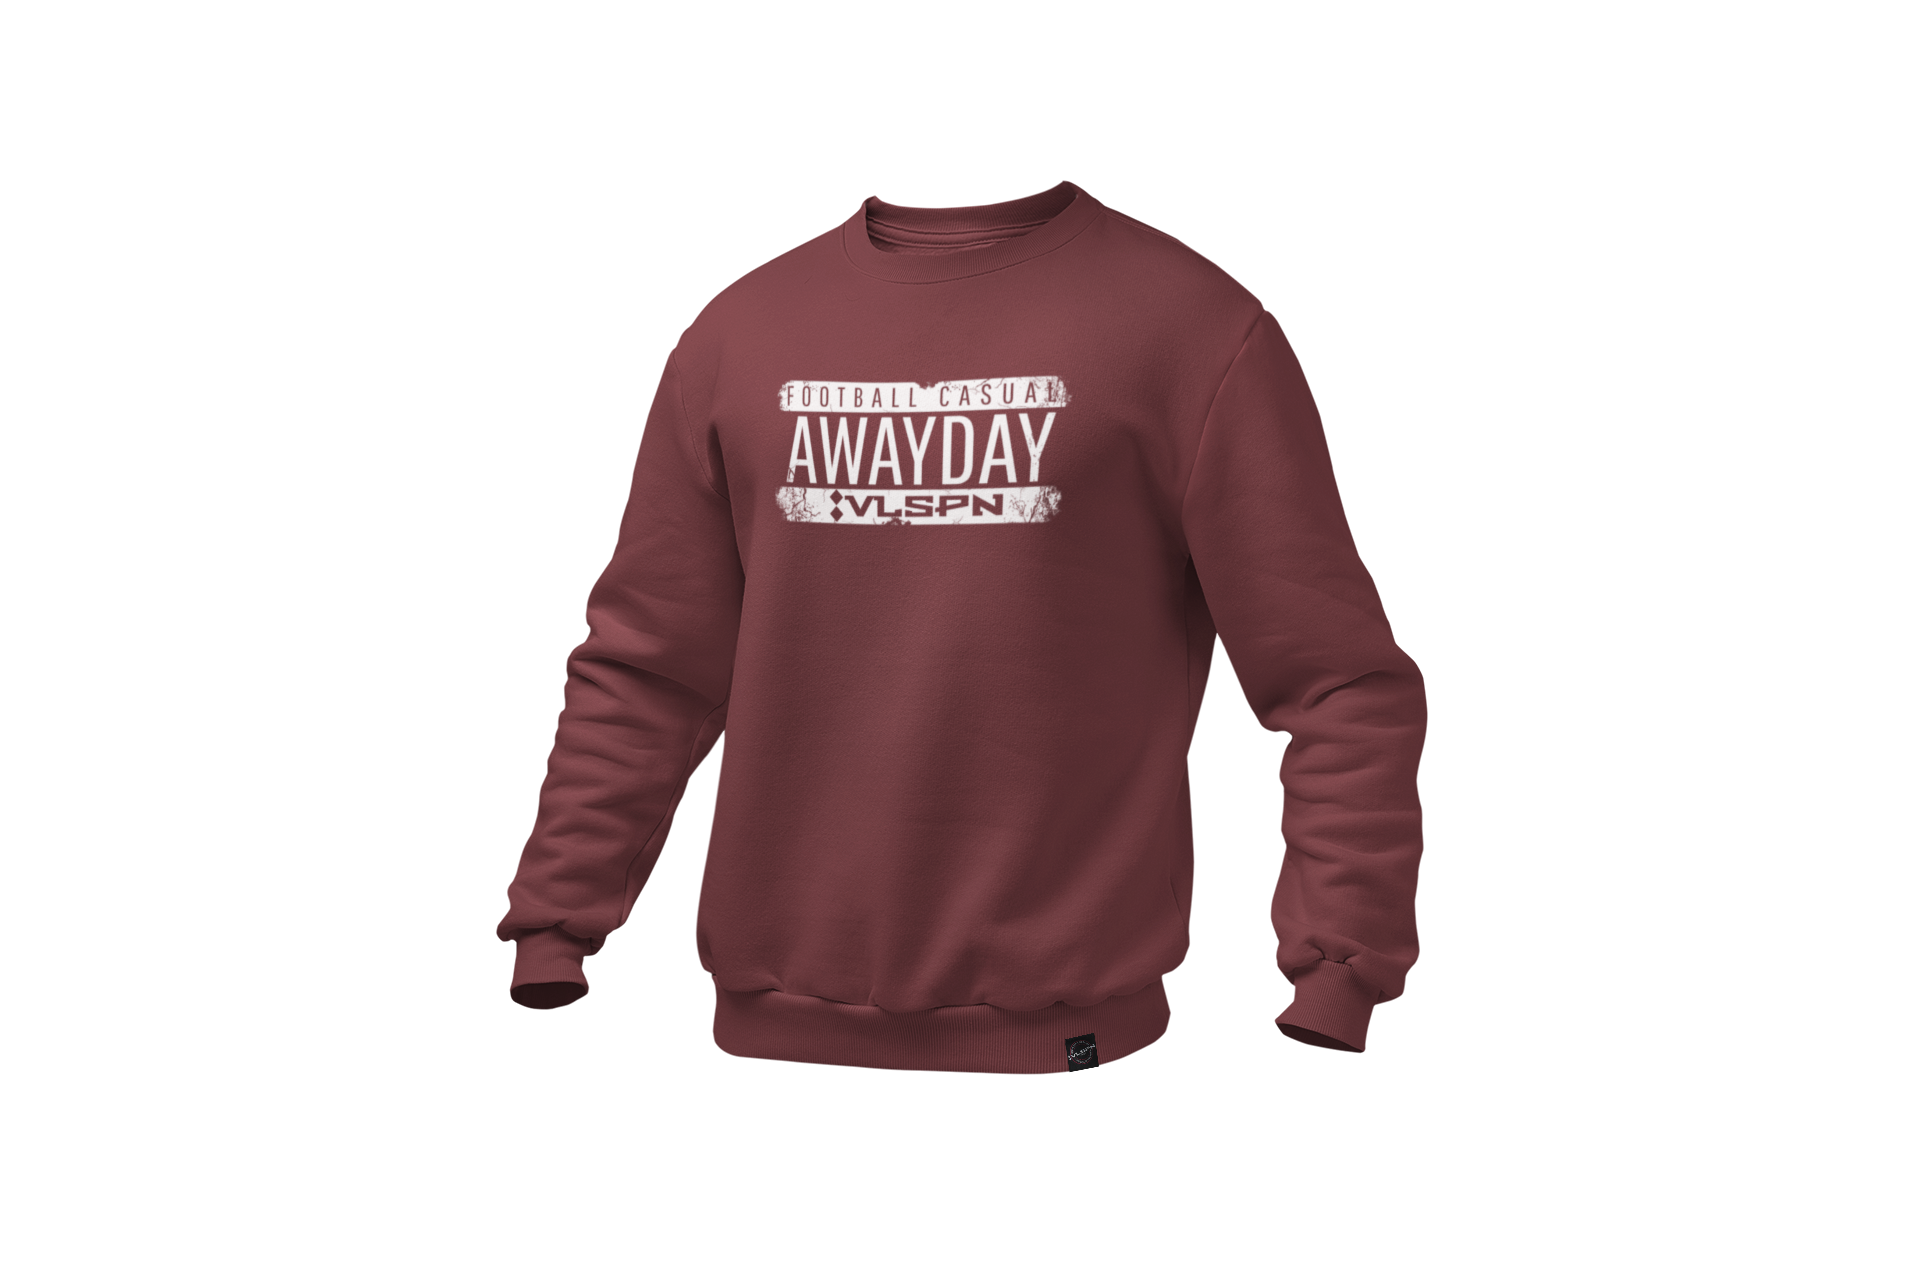 mockup-of-a-ghosted-crewneck-sweatshirt-over-a-solid-background-26960 (55).png